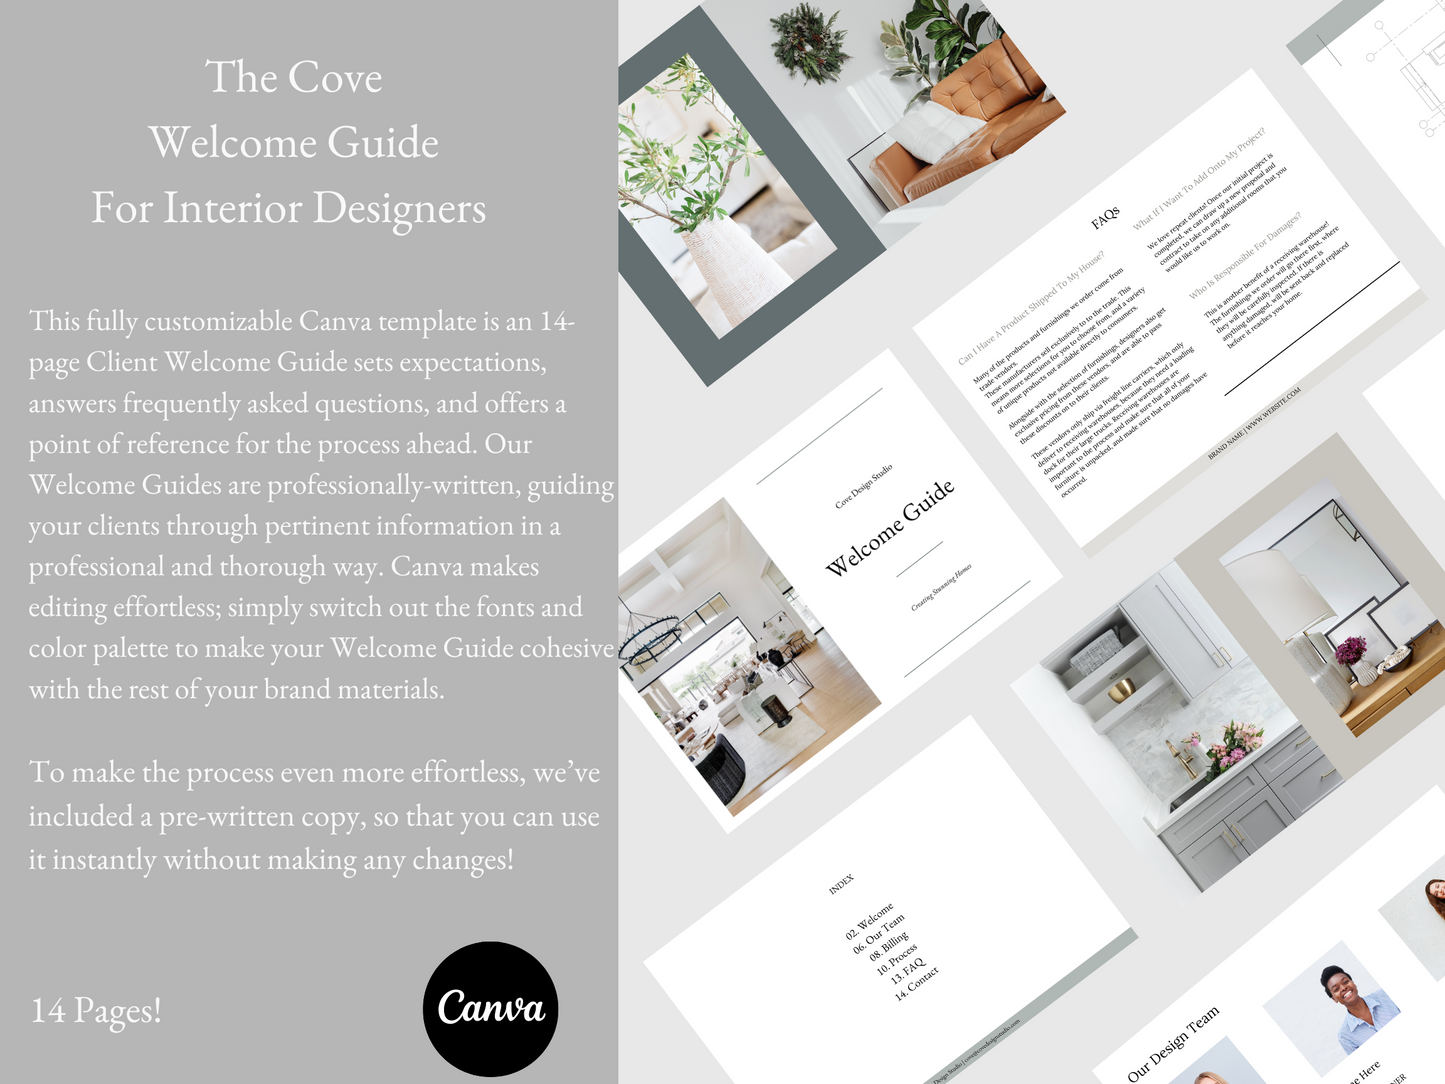 COVE WELCOME GUIDE FOR INTERIOR DESIGNERS